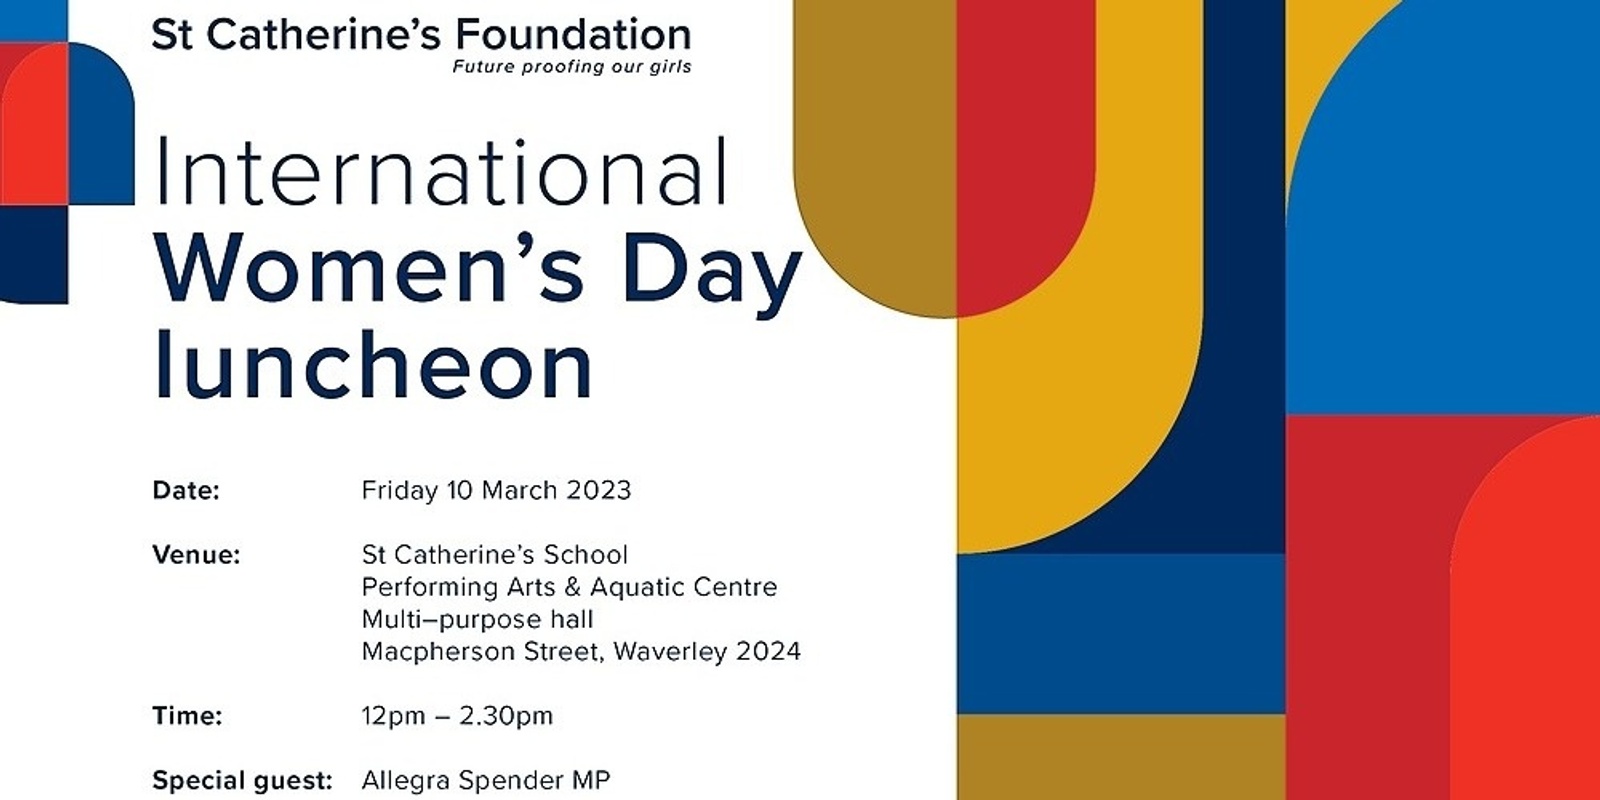 Banner image for St Catherine's Foundation International Women's Day luncheon